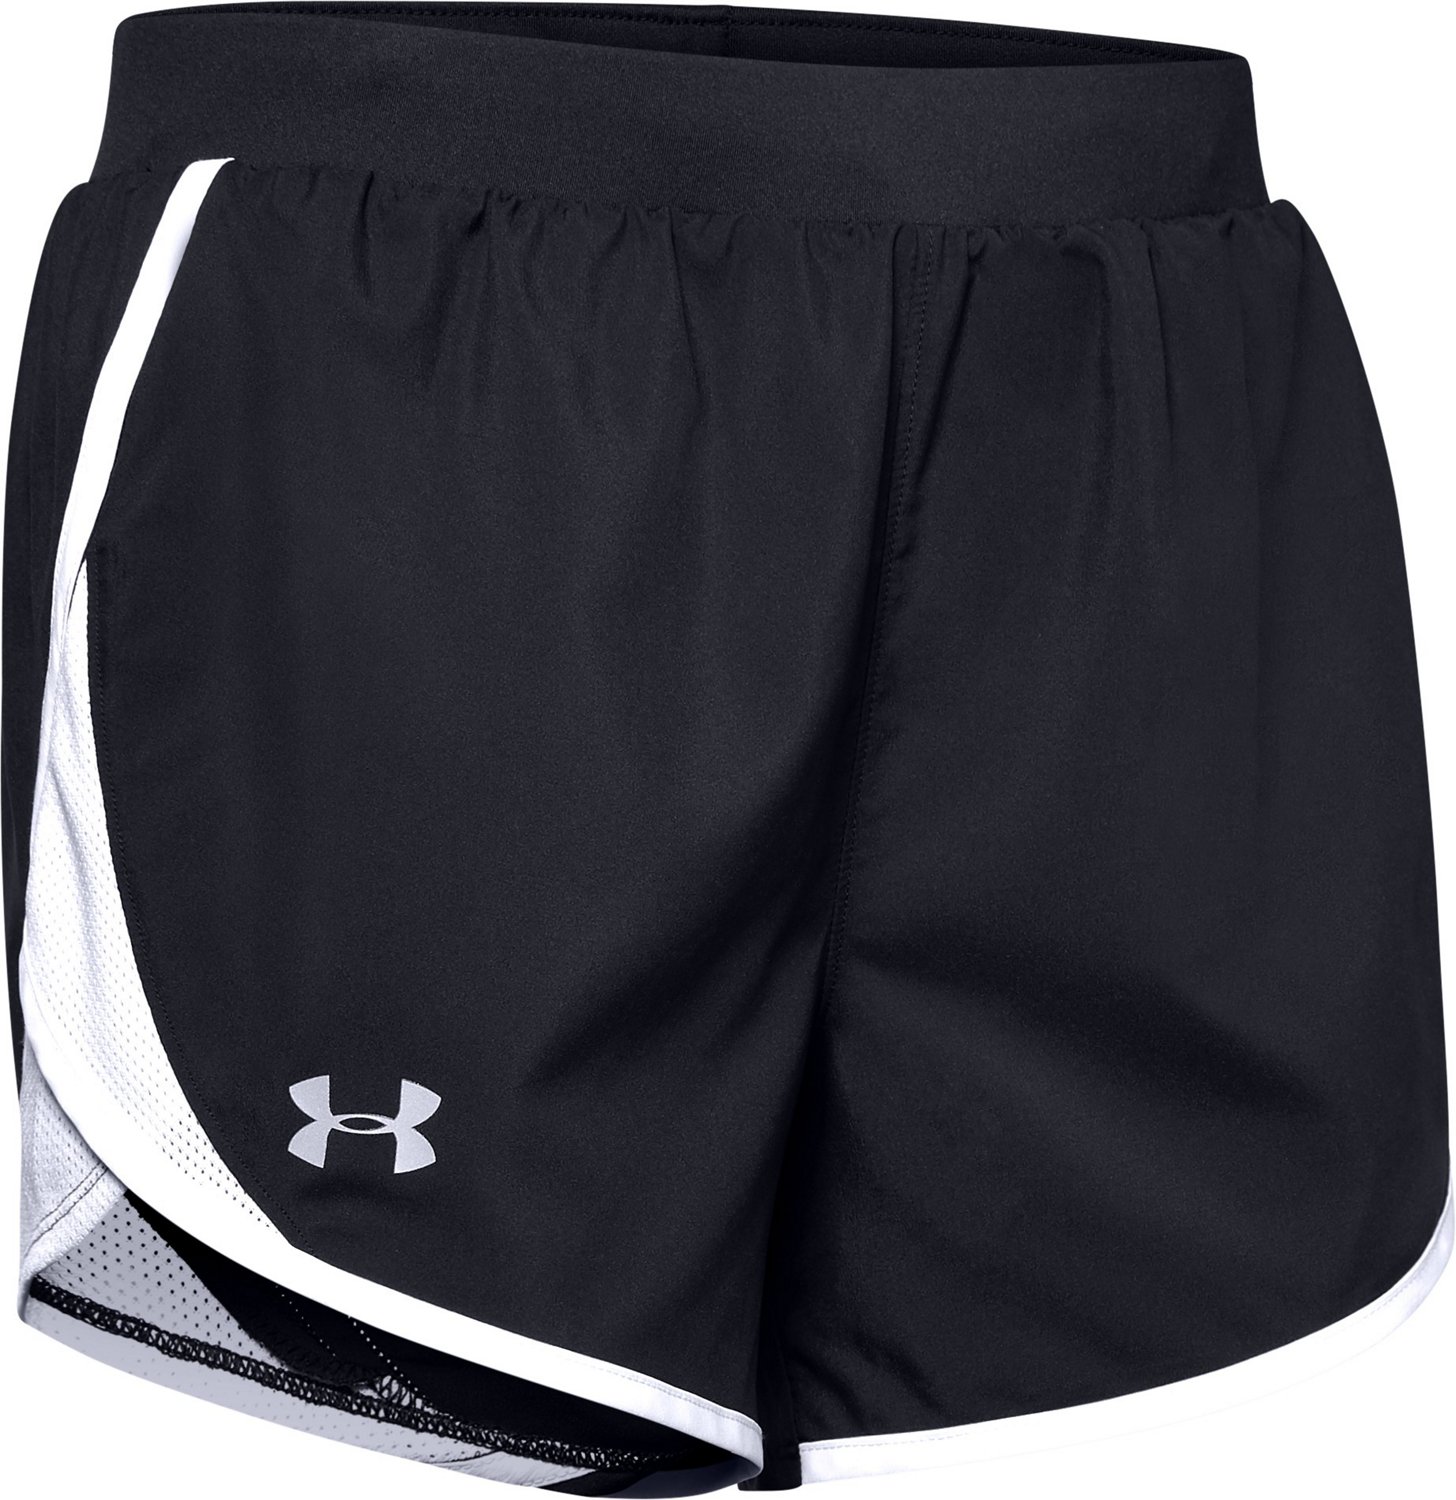 Under Armour Women's Fly By 2.0 Shorts | Free Shipping at Academy